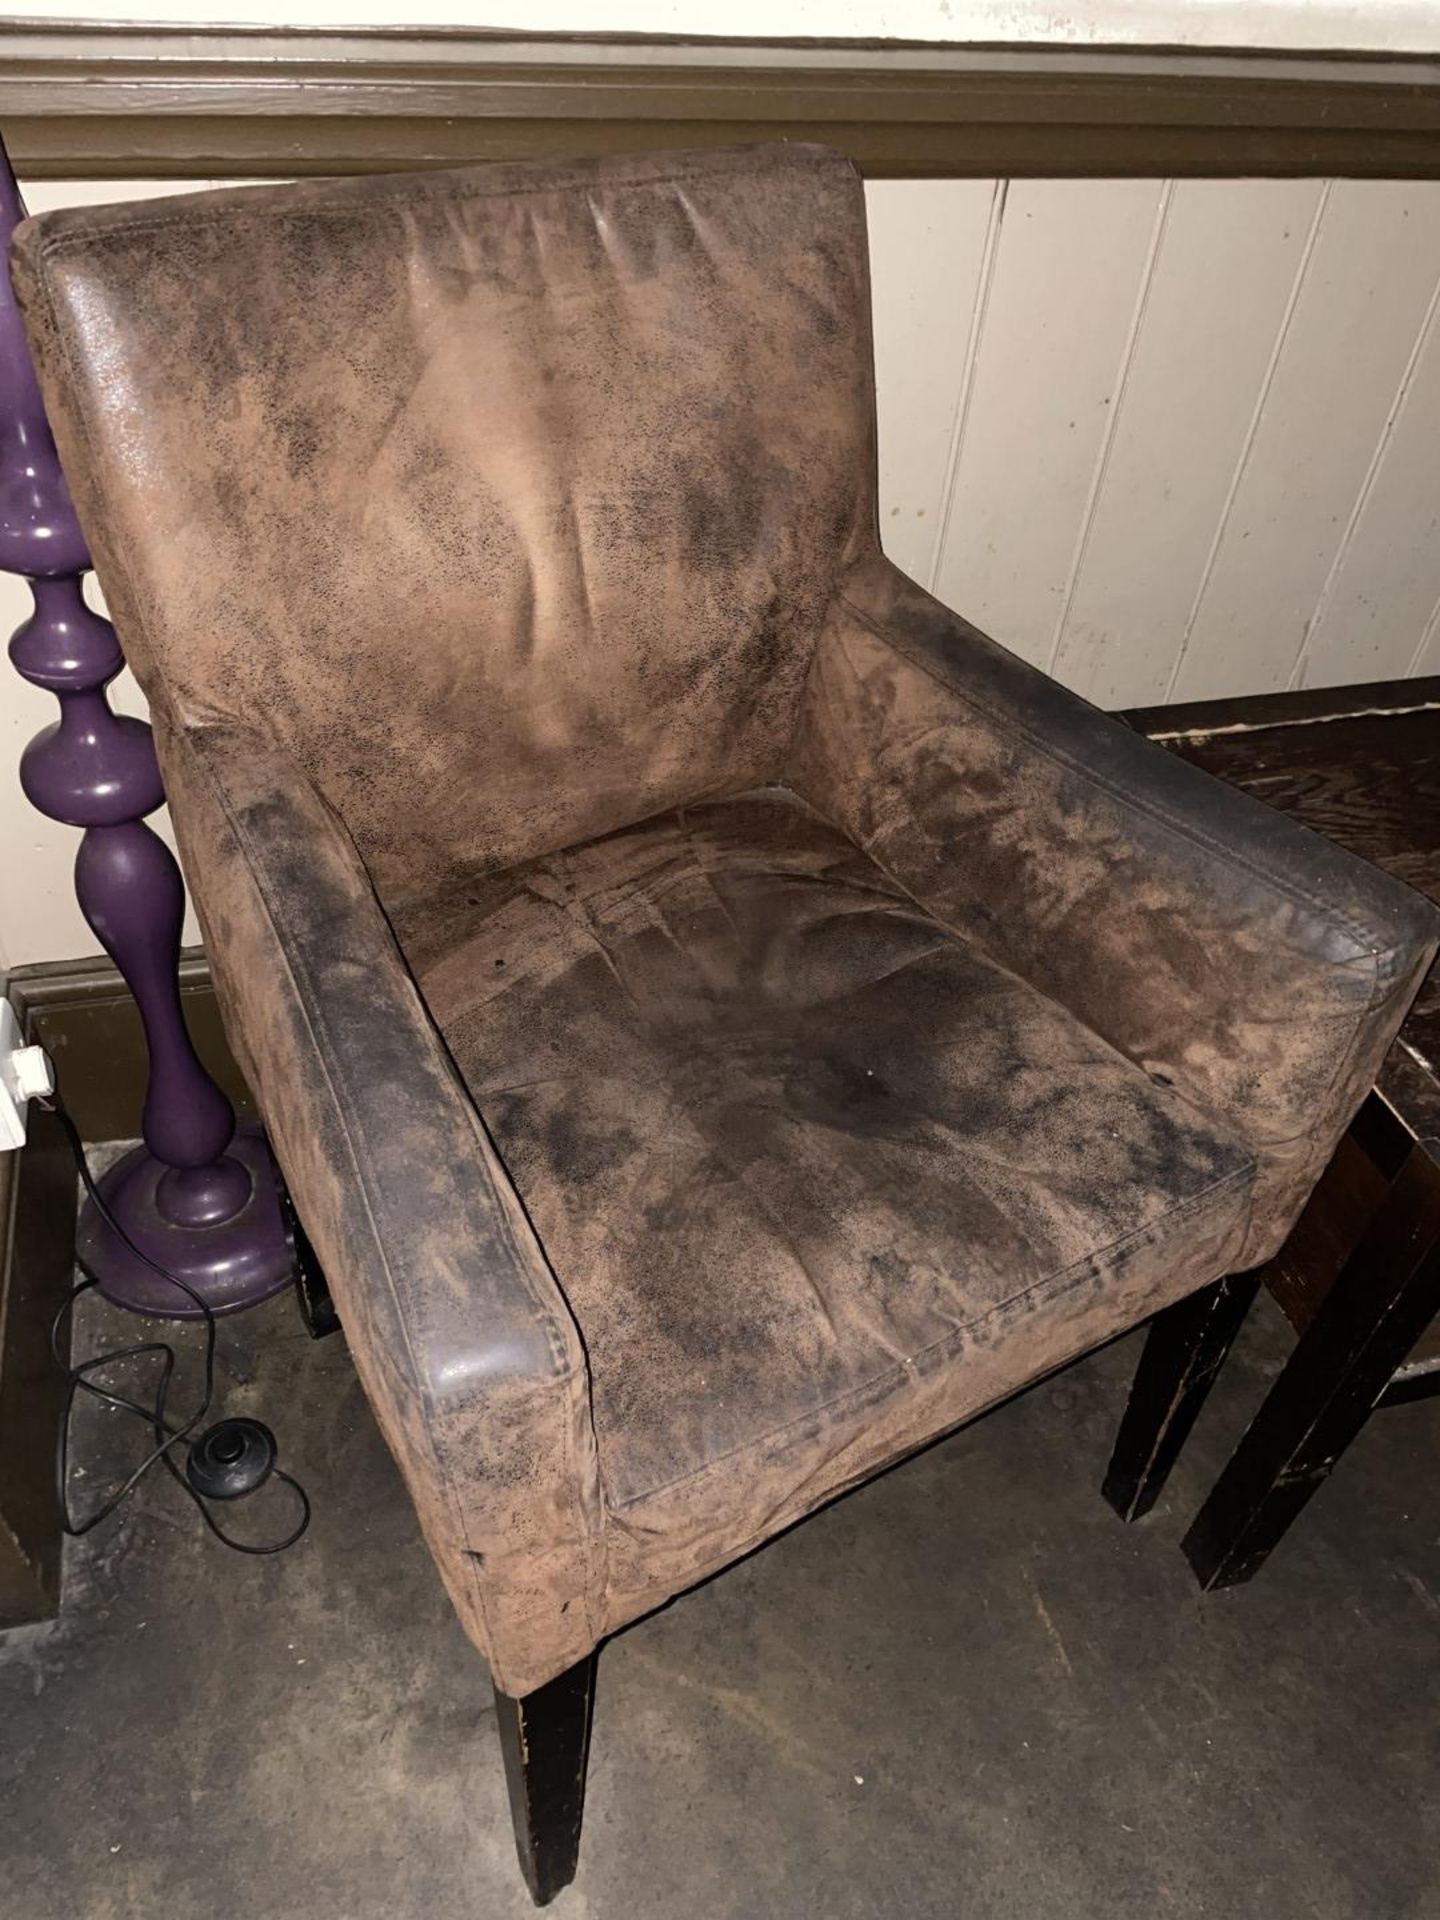 Period-Style 4-Piece Set Comprising 2 x Distressed Leather Armchairs, Table and Aubergine Floor Lamp - Image 3 of 7